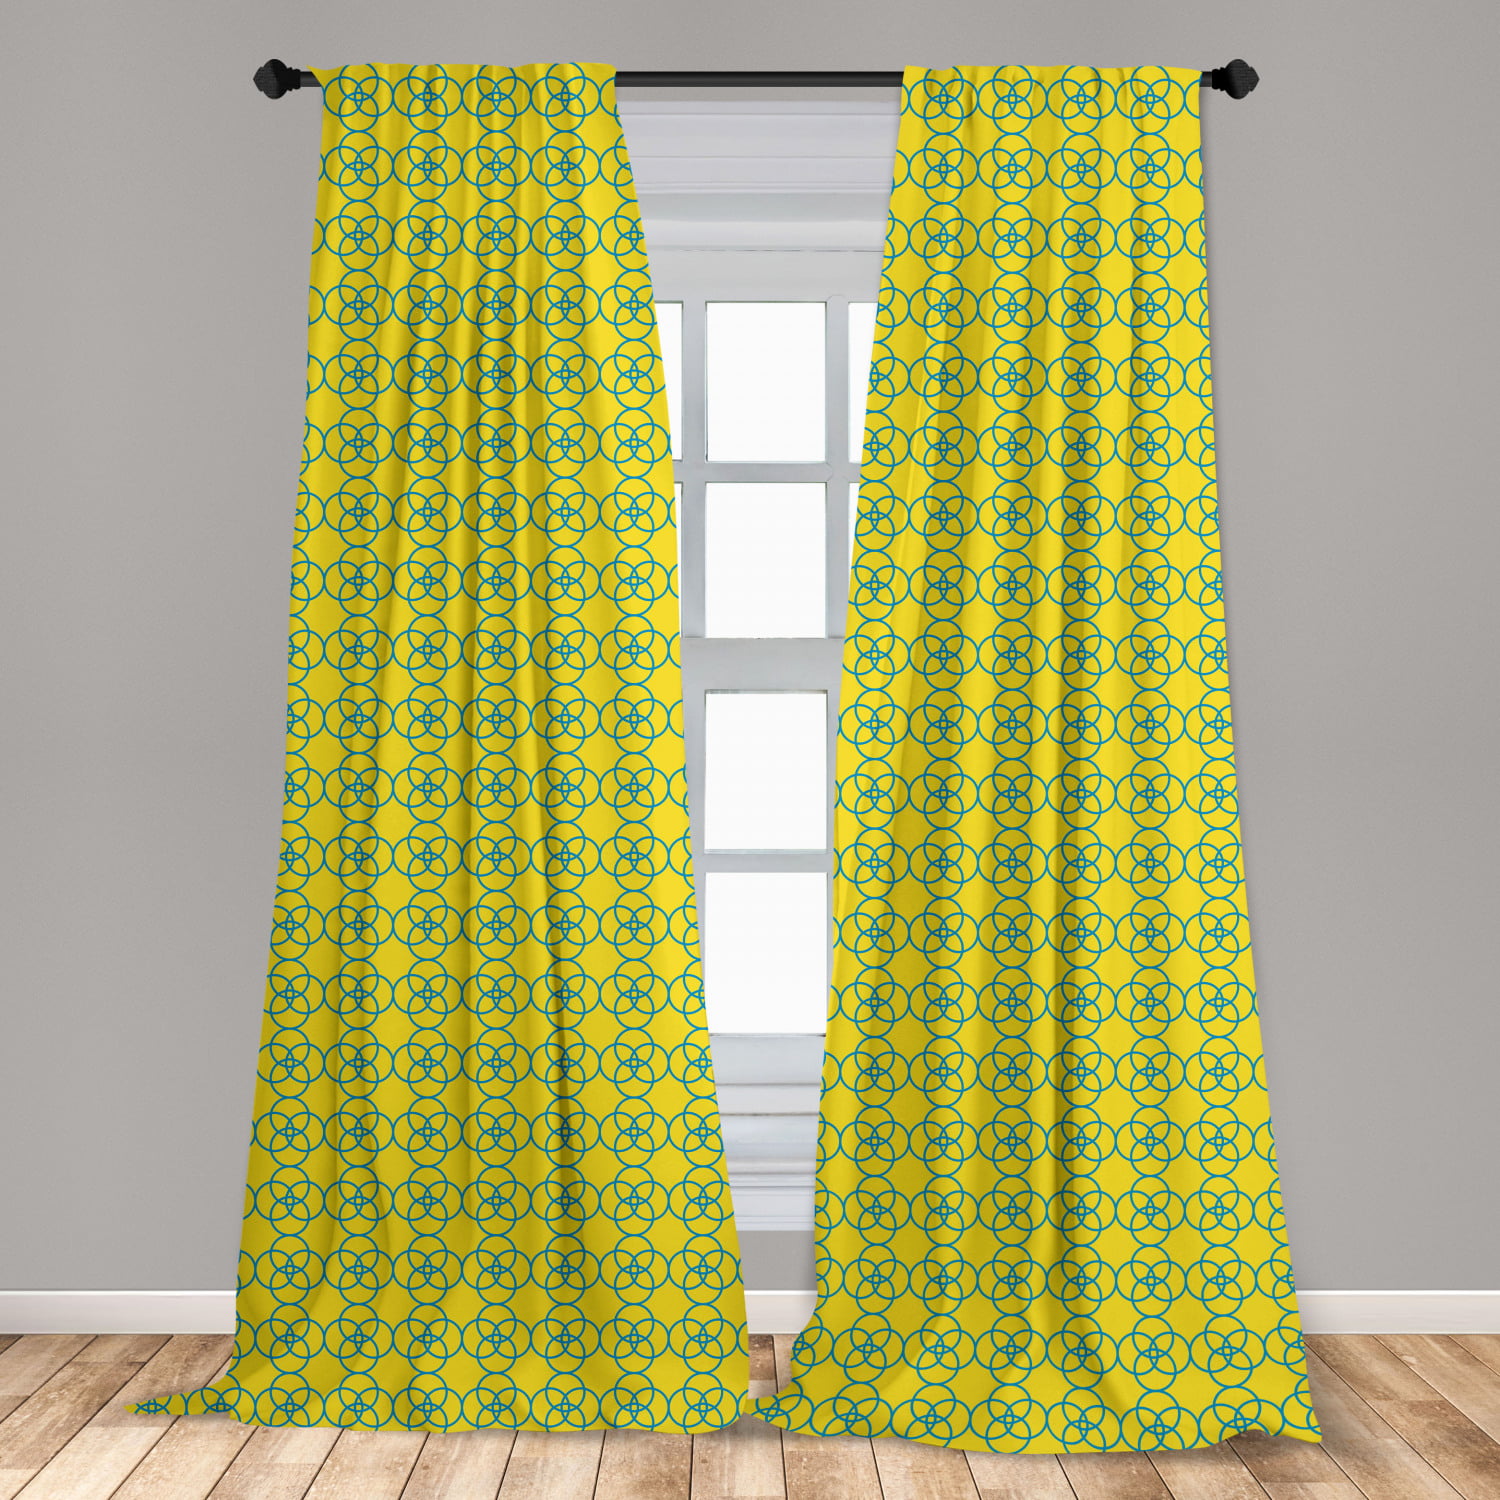 Intelligent Design Yellow Curtains for Living Room Modern Contemporary Grommet Room Darkening Curtains for Bedroom 42X63 Alex Geometric Chevron Window Curtains 2-Panel Pack